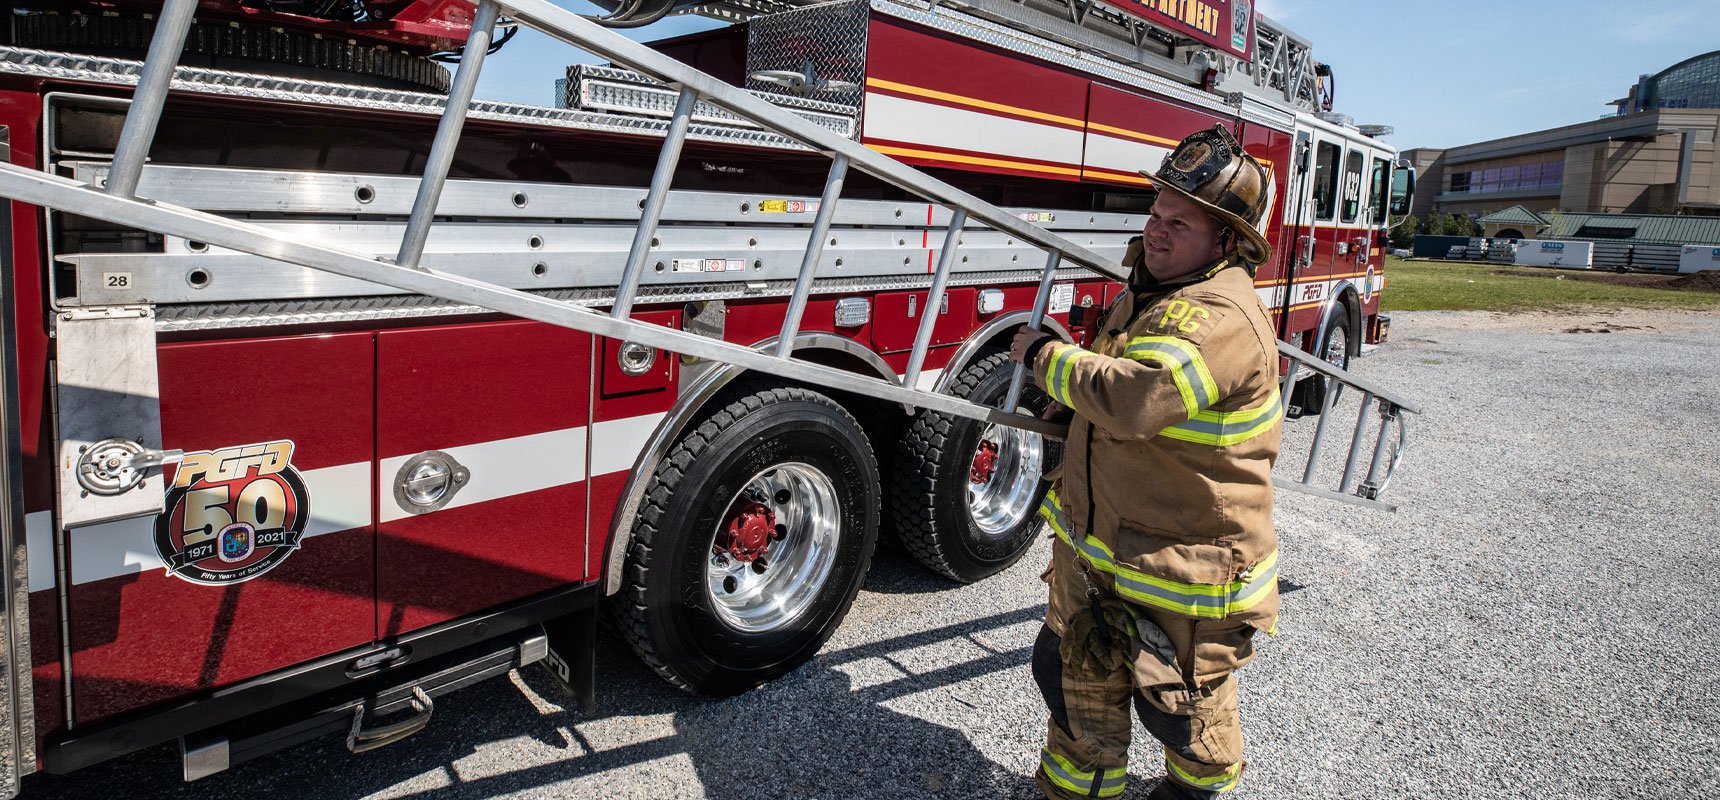 A firefighter in bunker gear pulls a ground ladder from an ergonomically positioned side compartment of a red Pierce apparatus parked on a gravel-covered area.